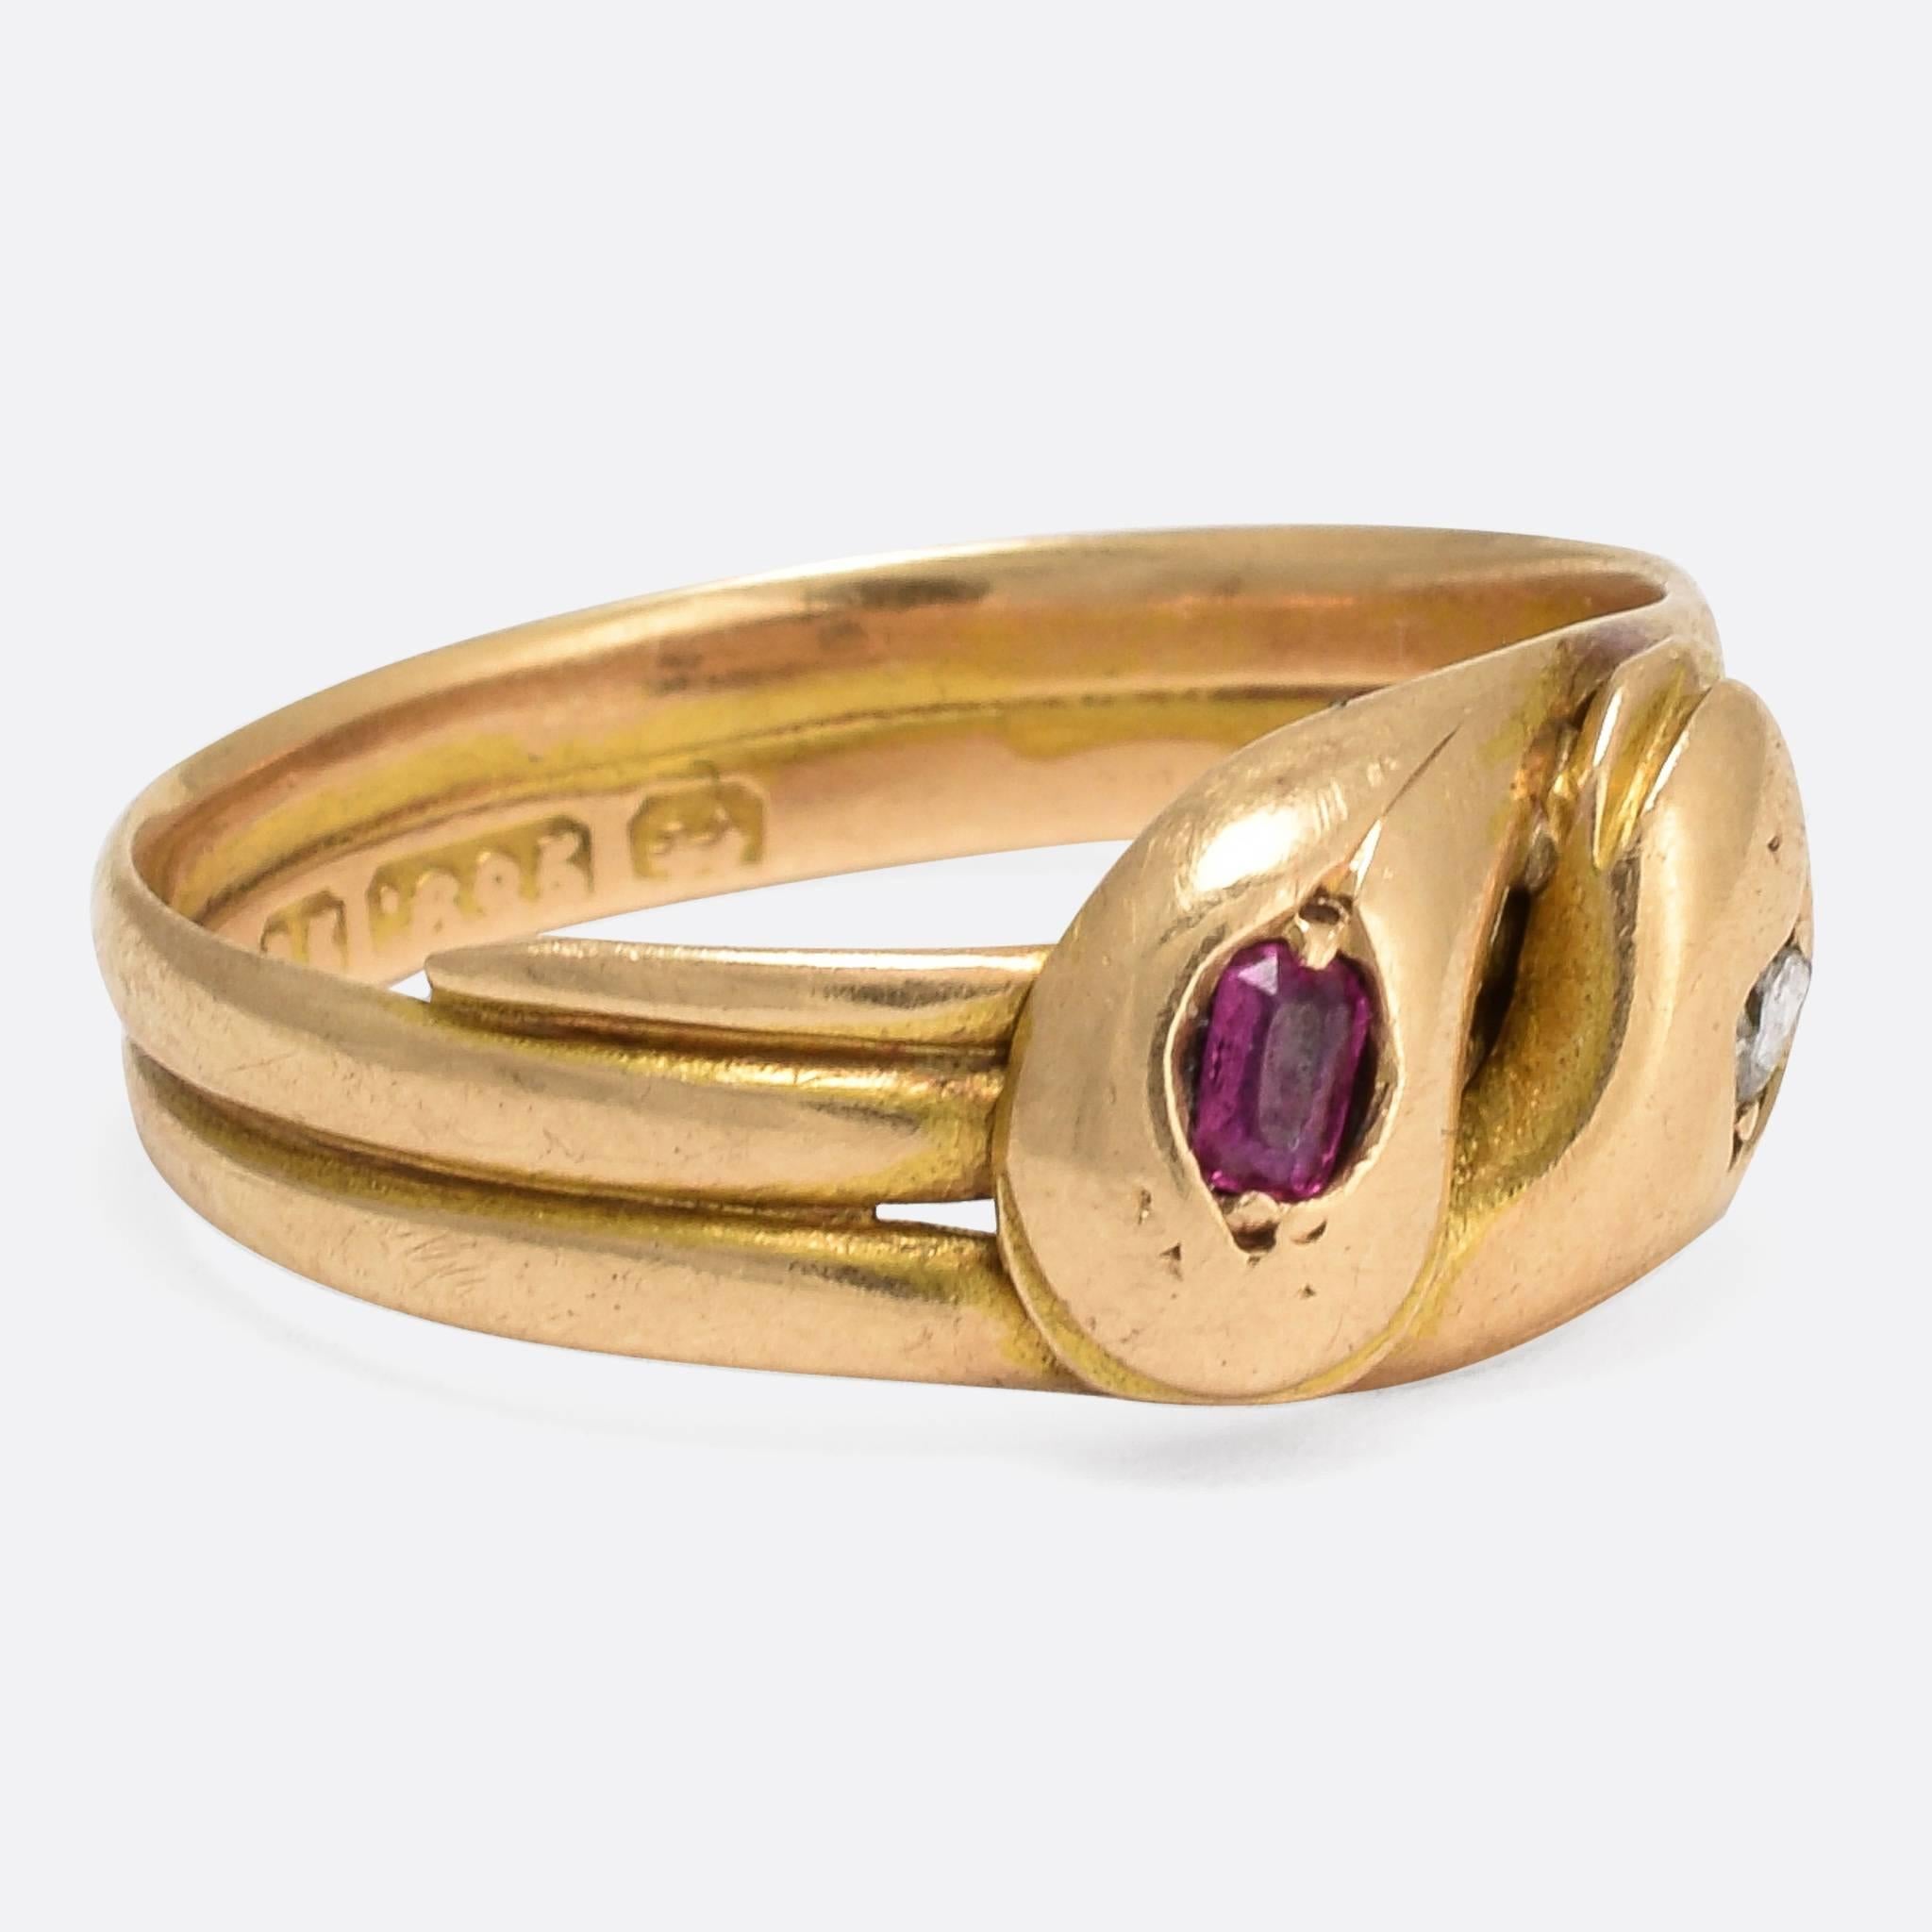 This classic coiled double snake ring is modelled in 15k yellow gold, with clear Chester hallmarks for the year 1882. Each head is set with a gemstone - one ruby and one rose cut diamond - and they rest together in a kind of snake hug. A pretty,